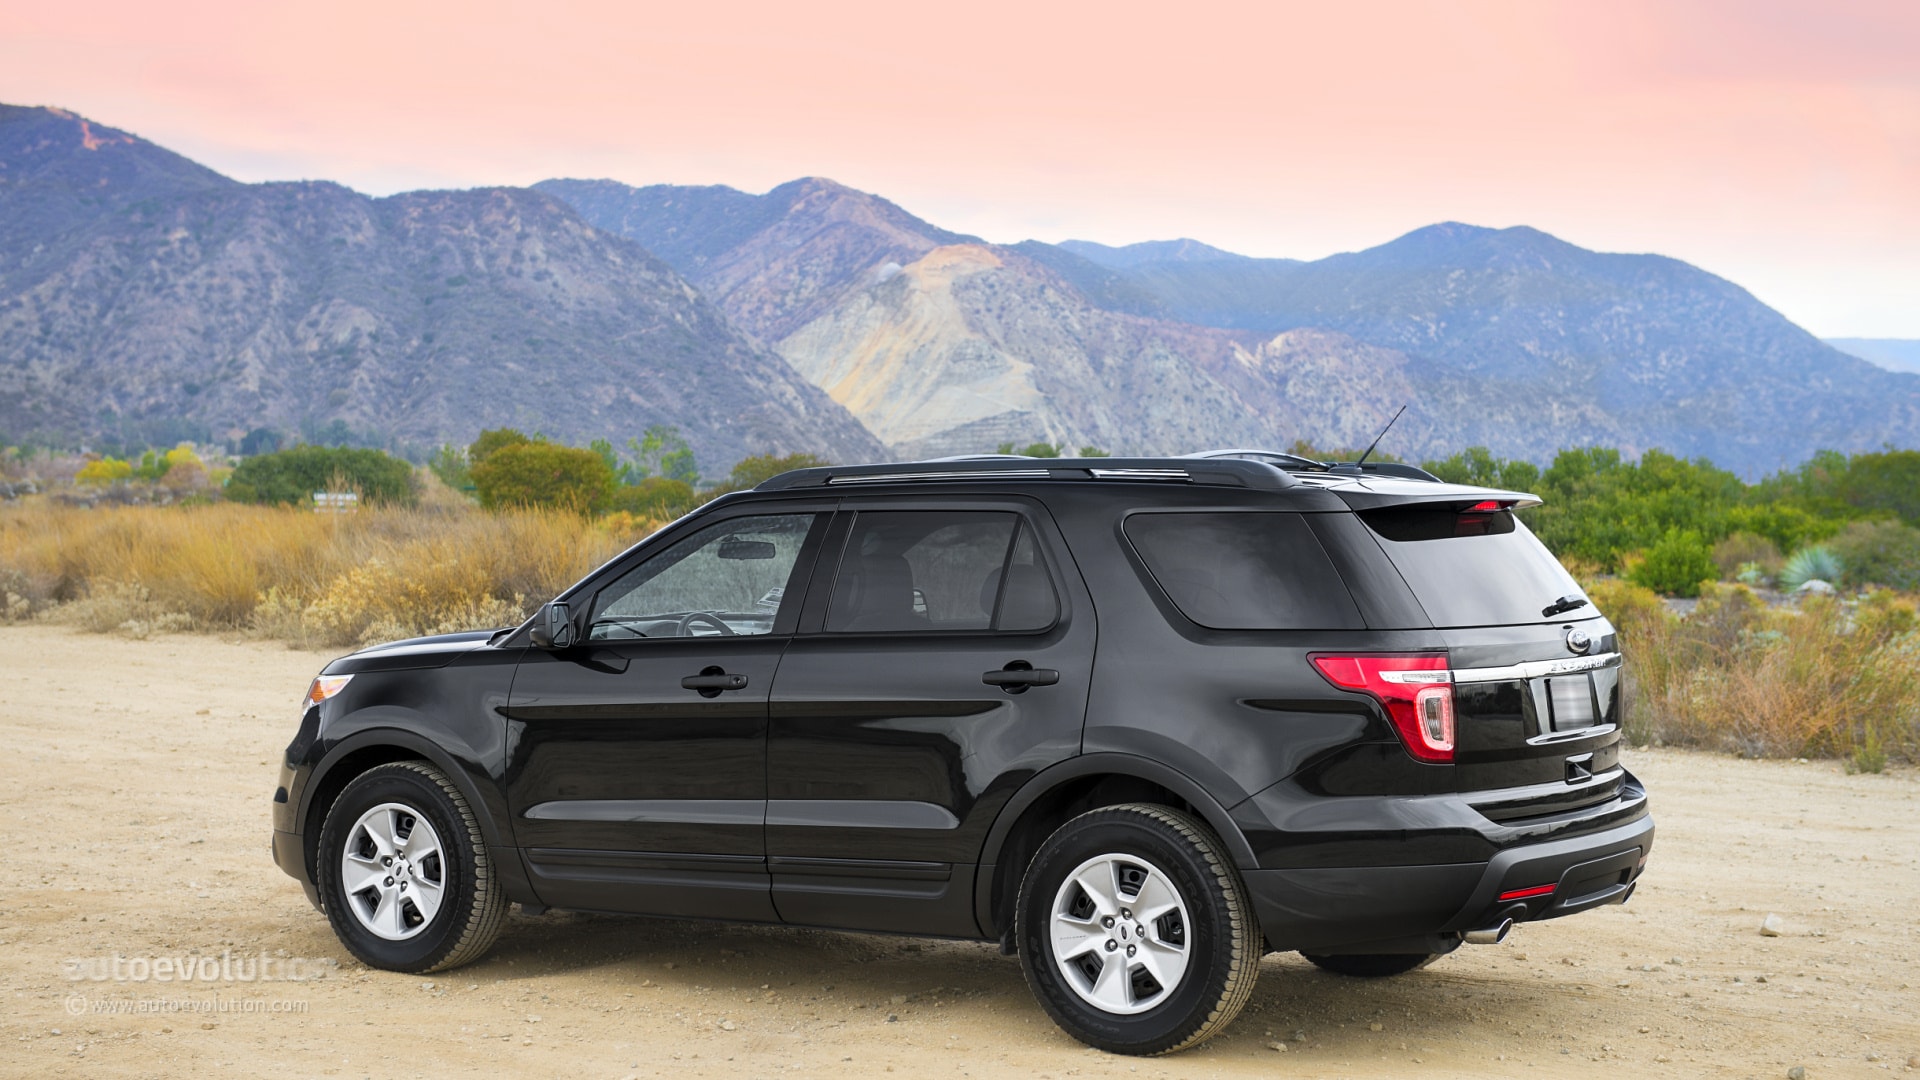 2014 Ford Explorer HD Wallpapers - autoevolution